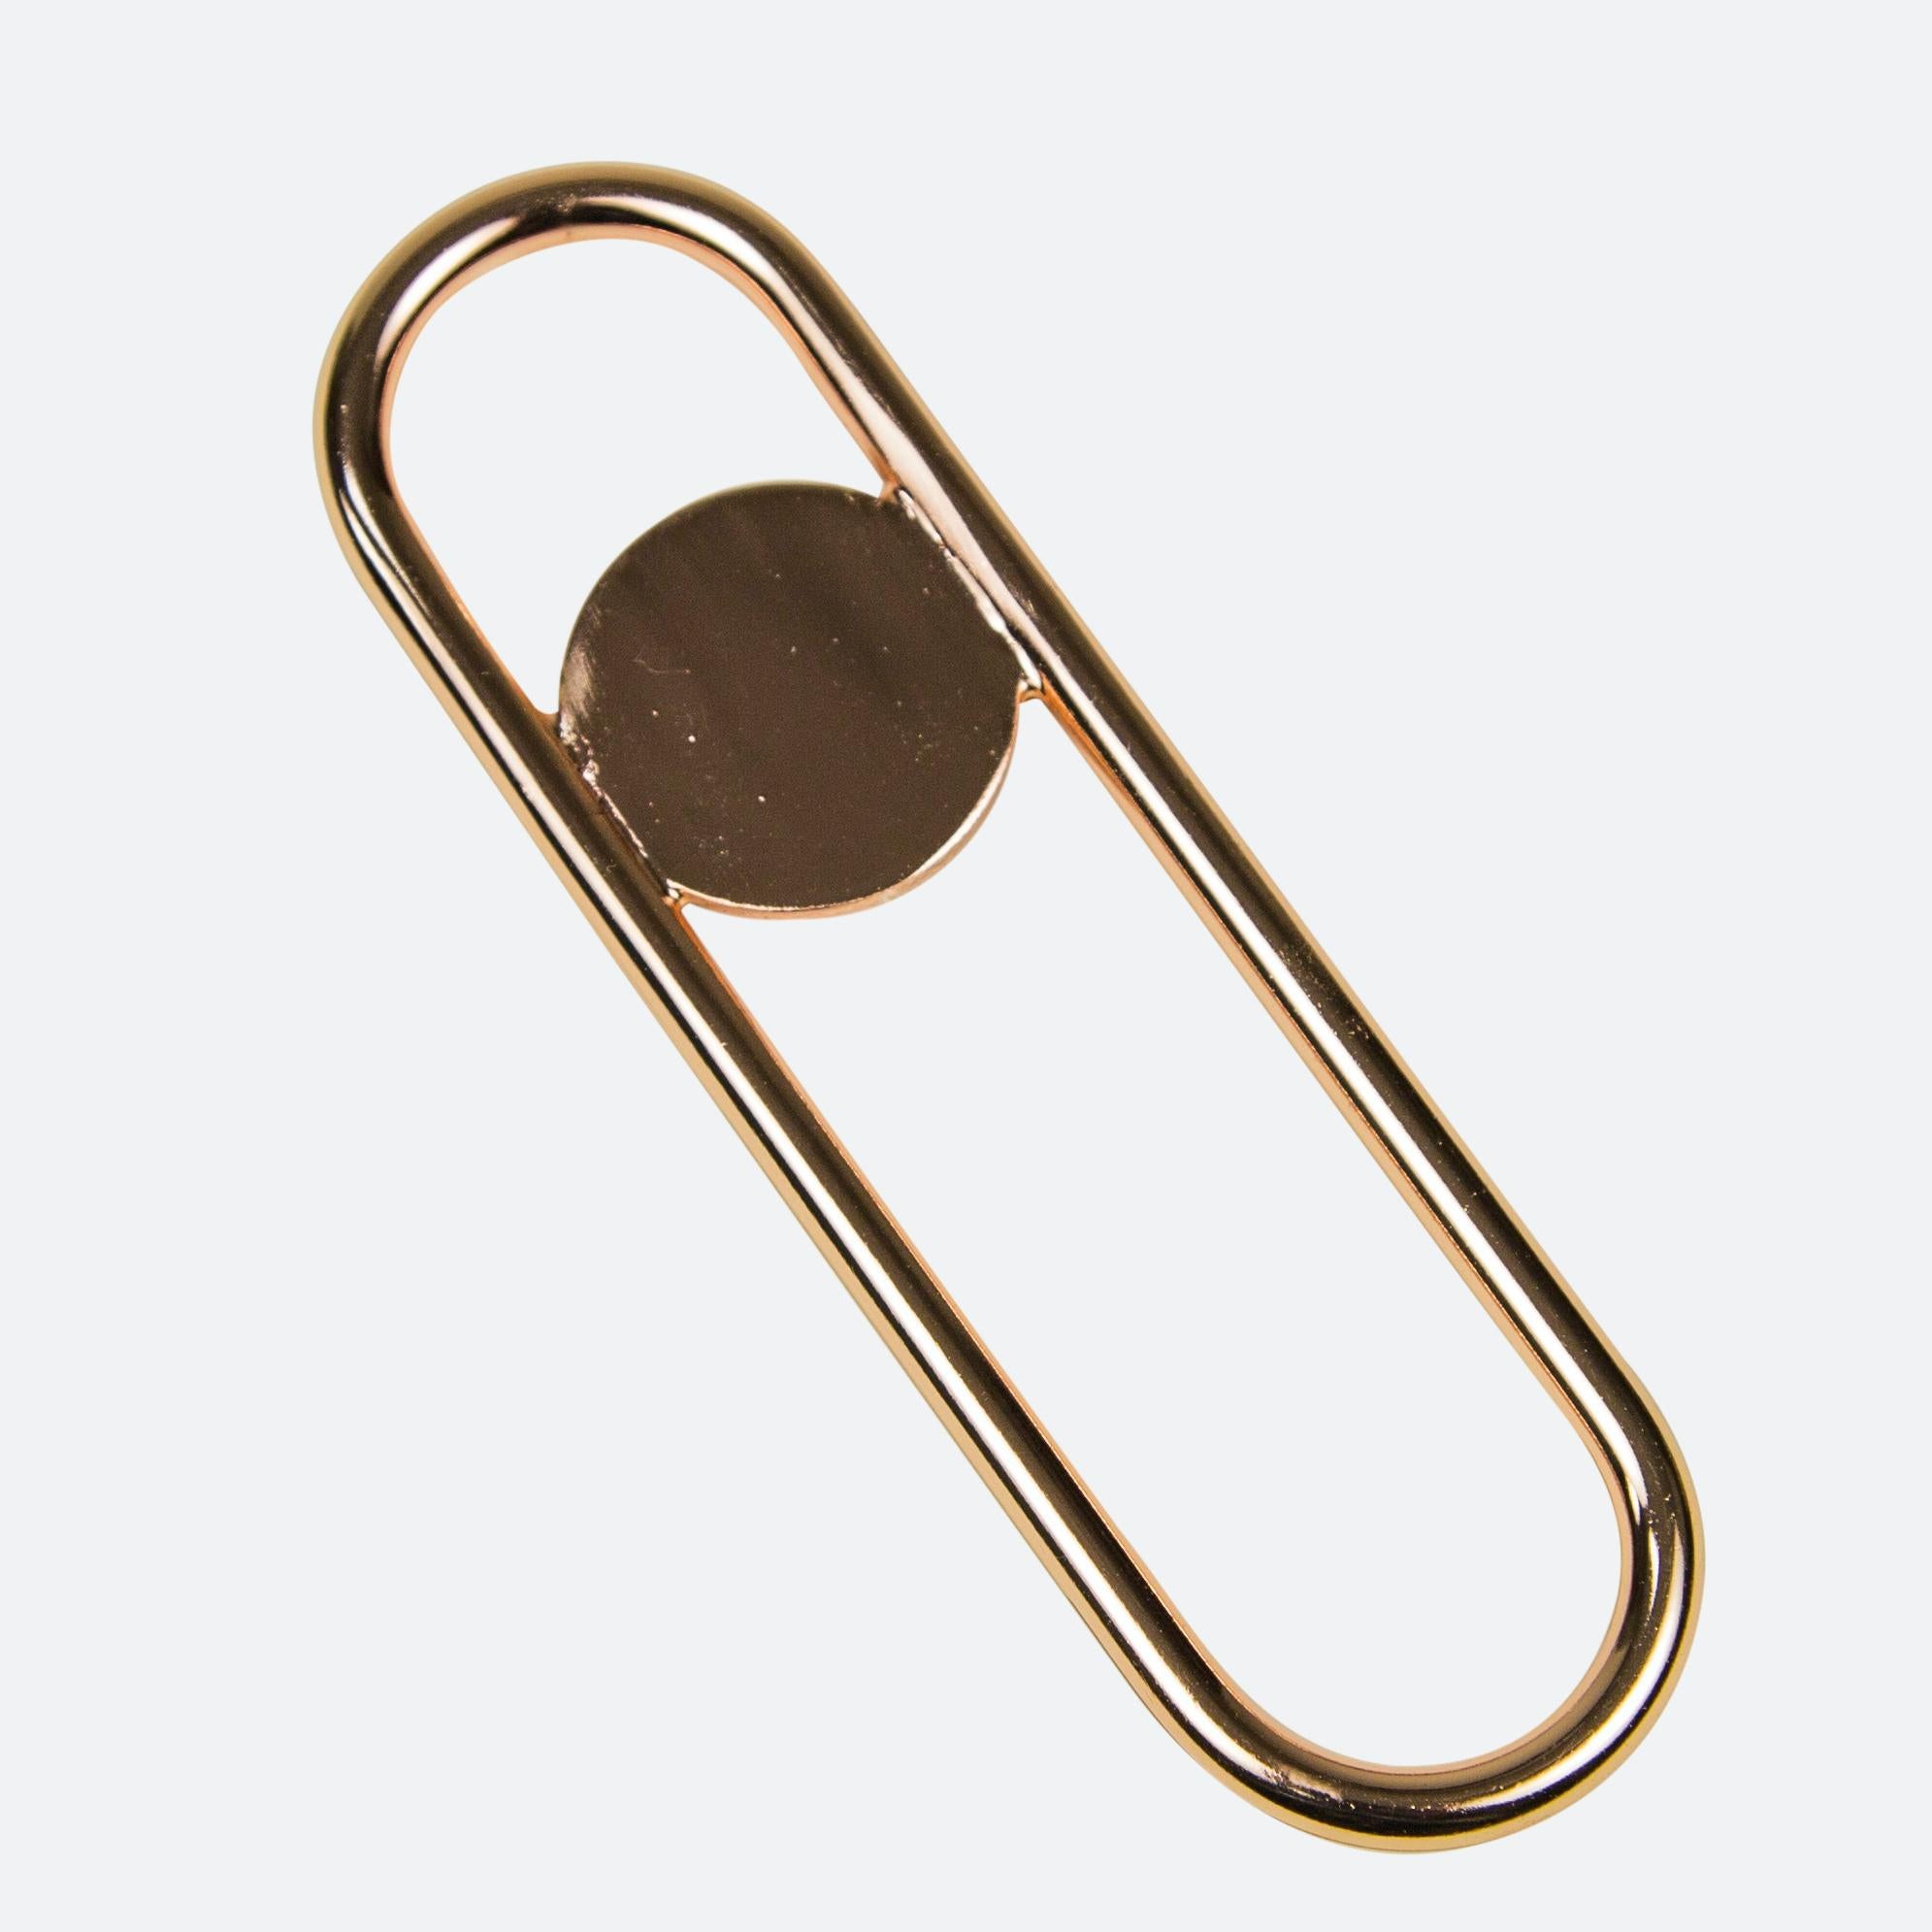 Chinese Disco Bottle Opener from Souda, Brass